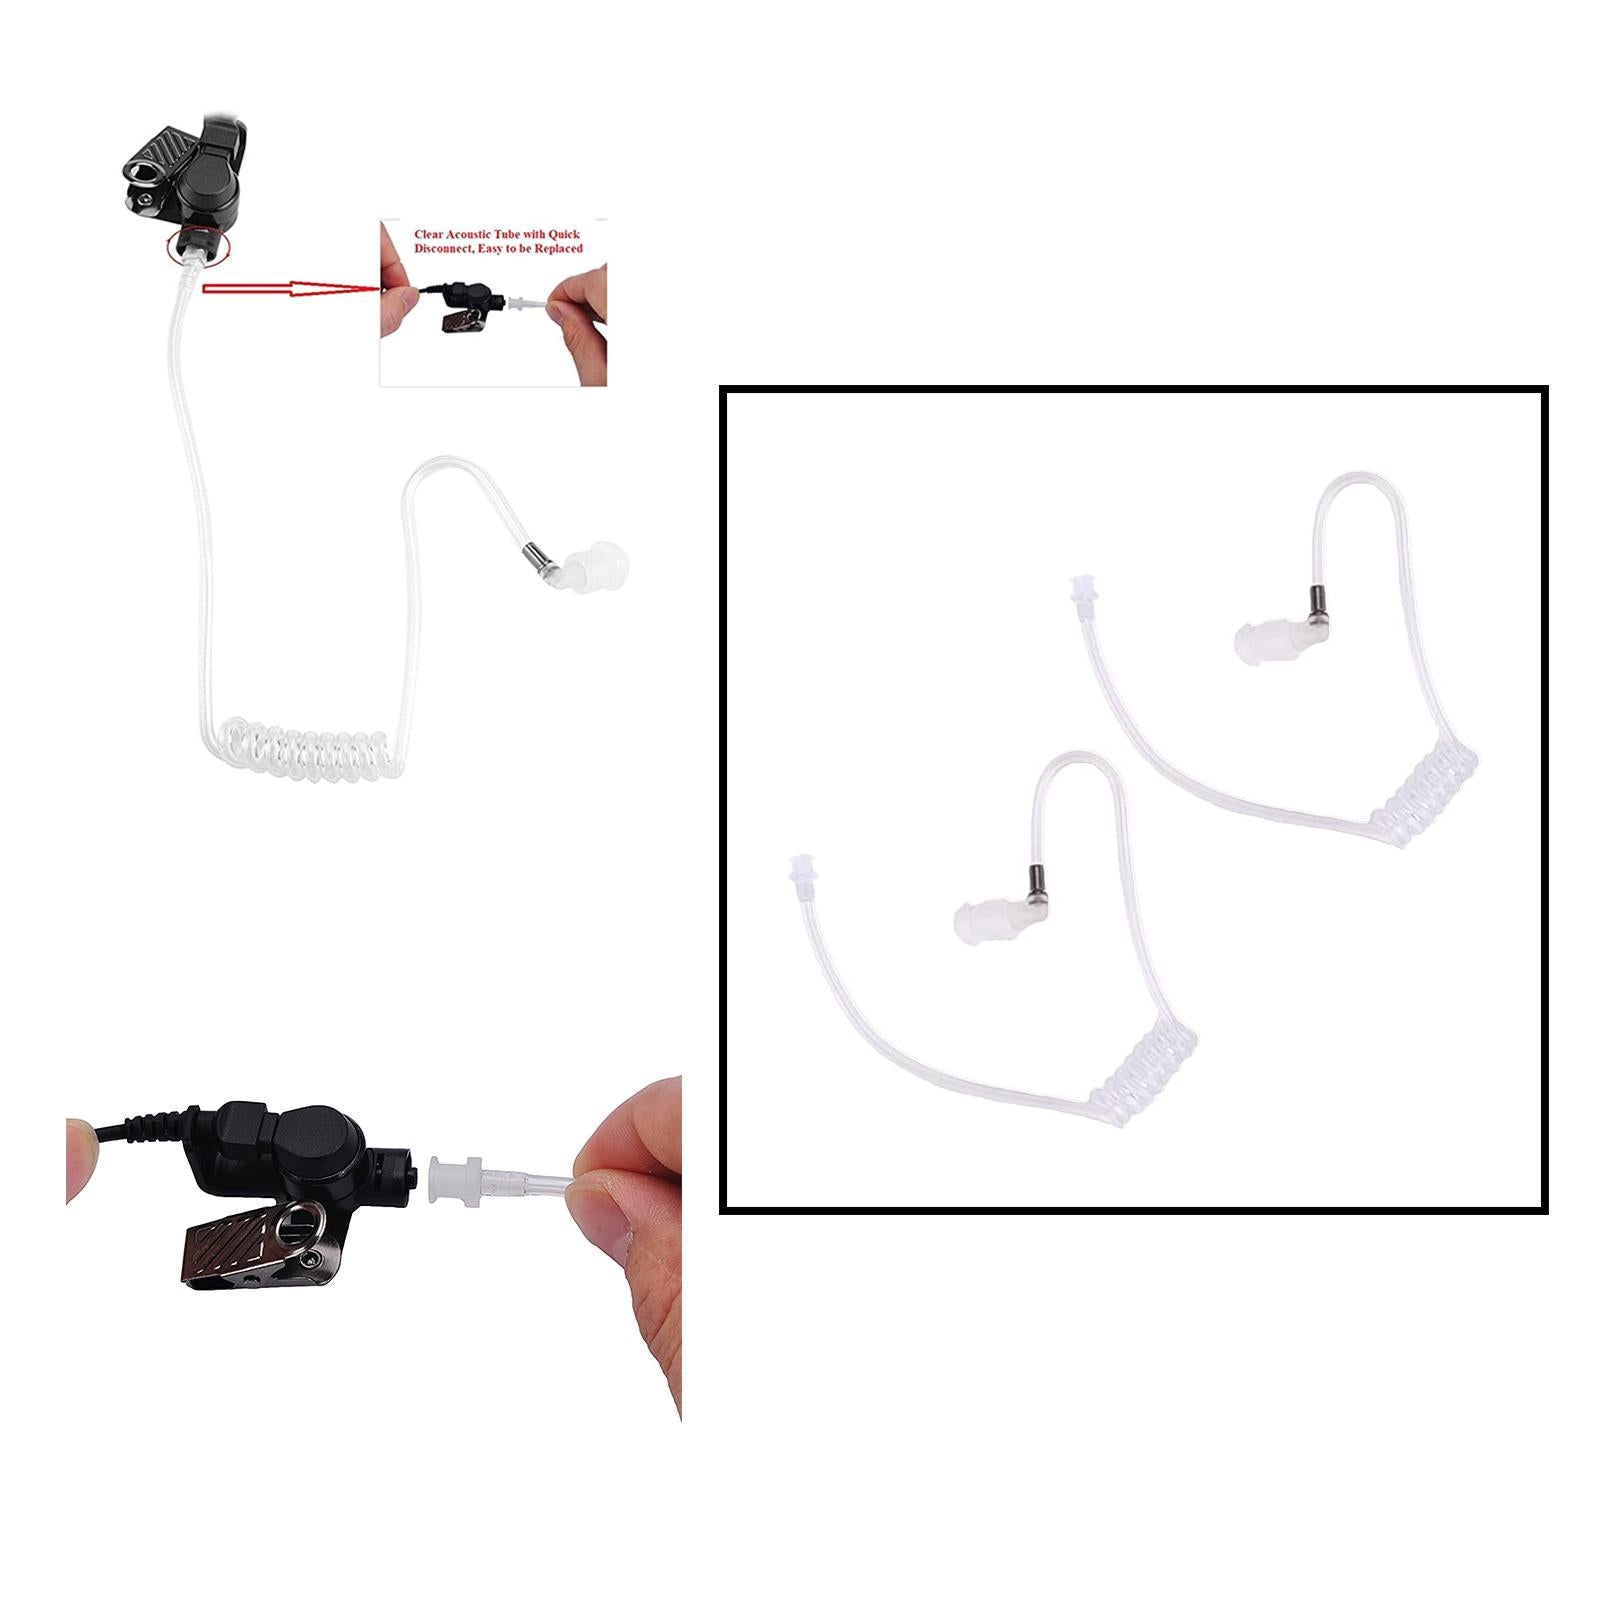 2 Pcs Replacement Acoustic Coil Tube Clear for Two Way Radio Talkie Earpiece